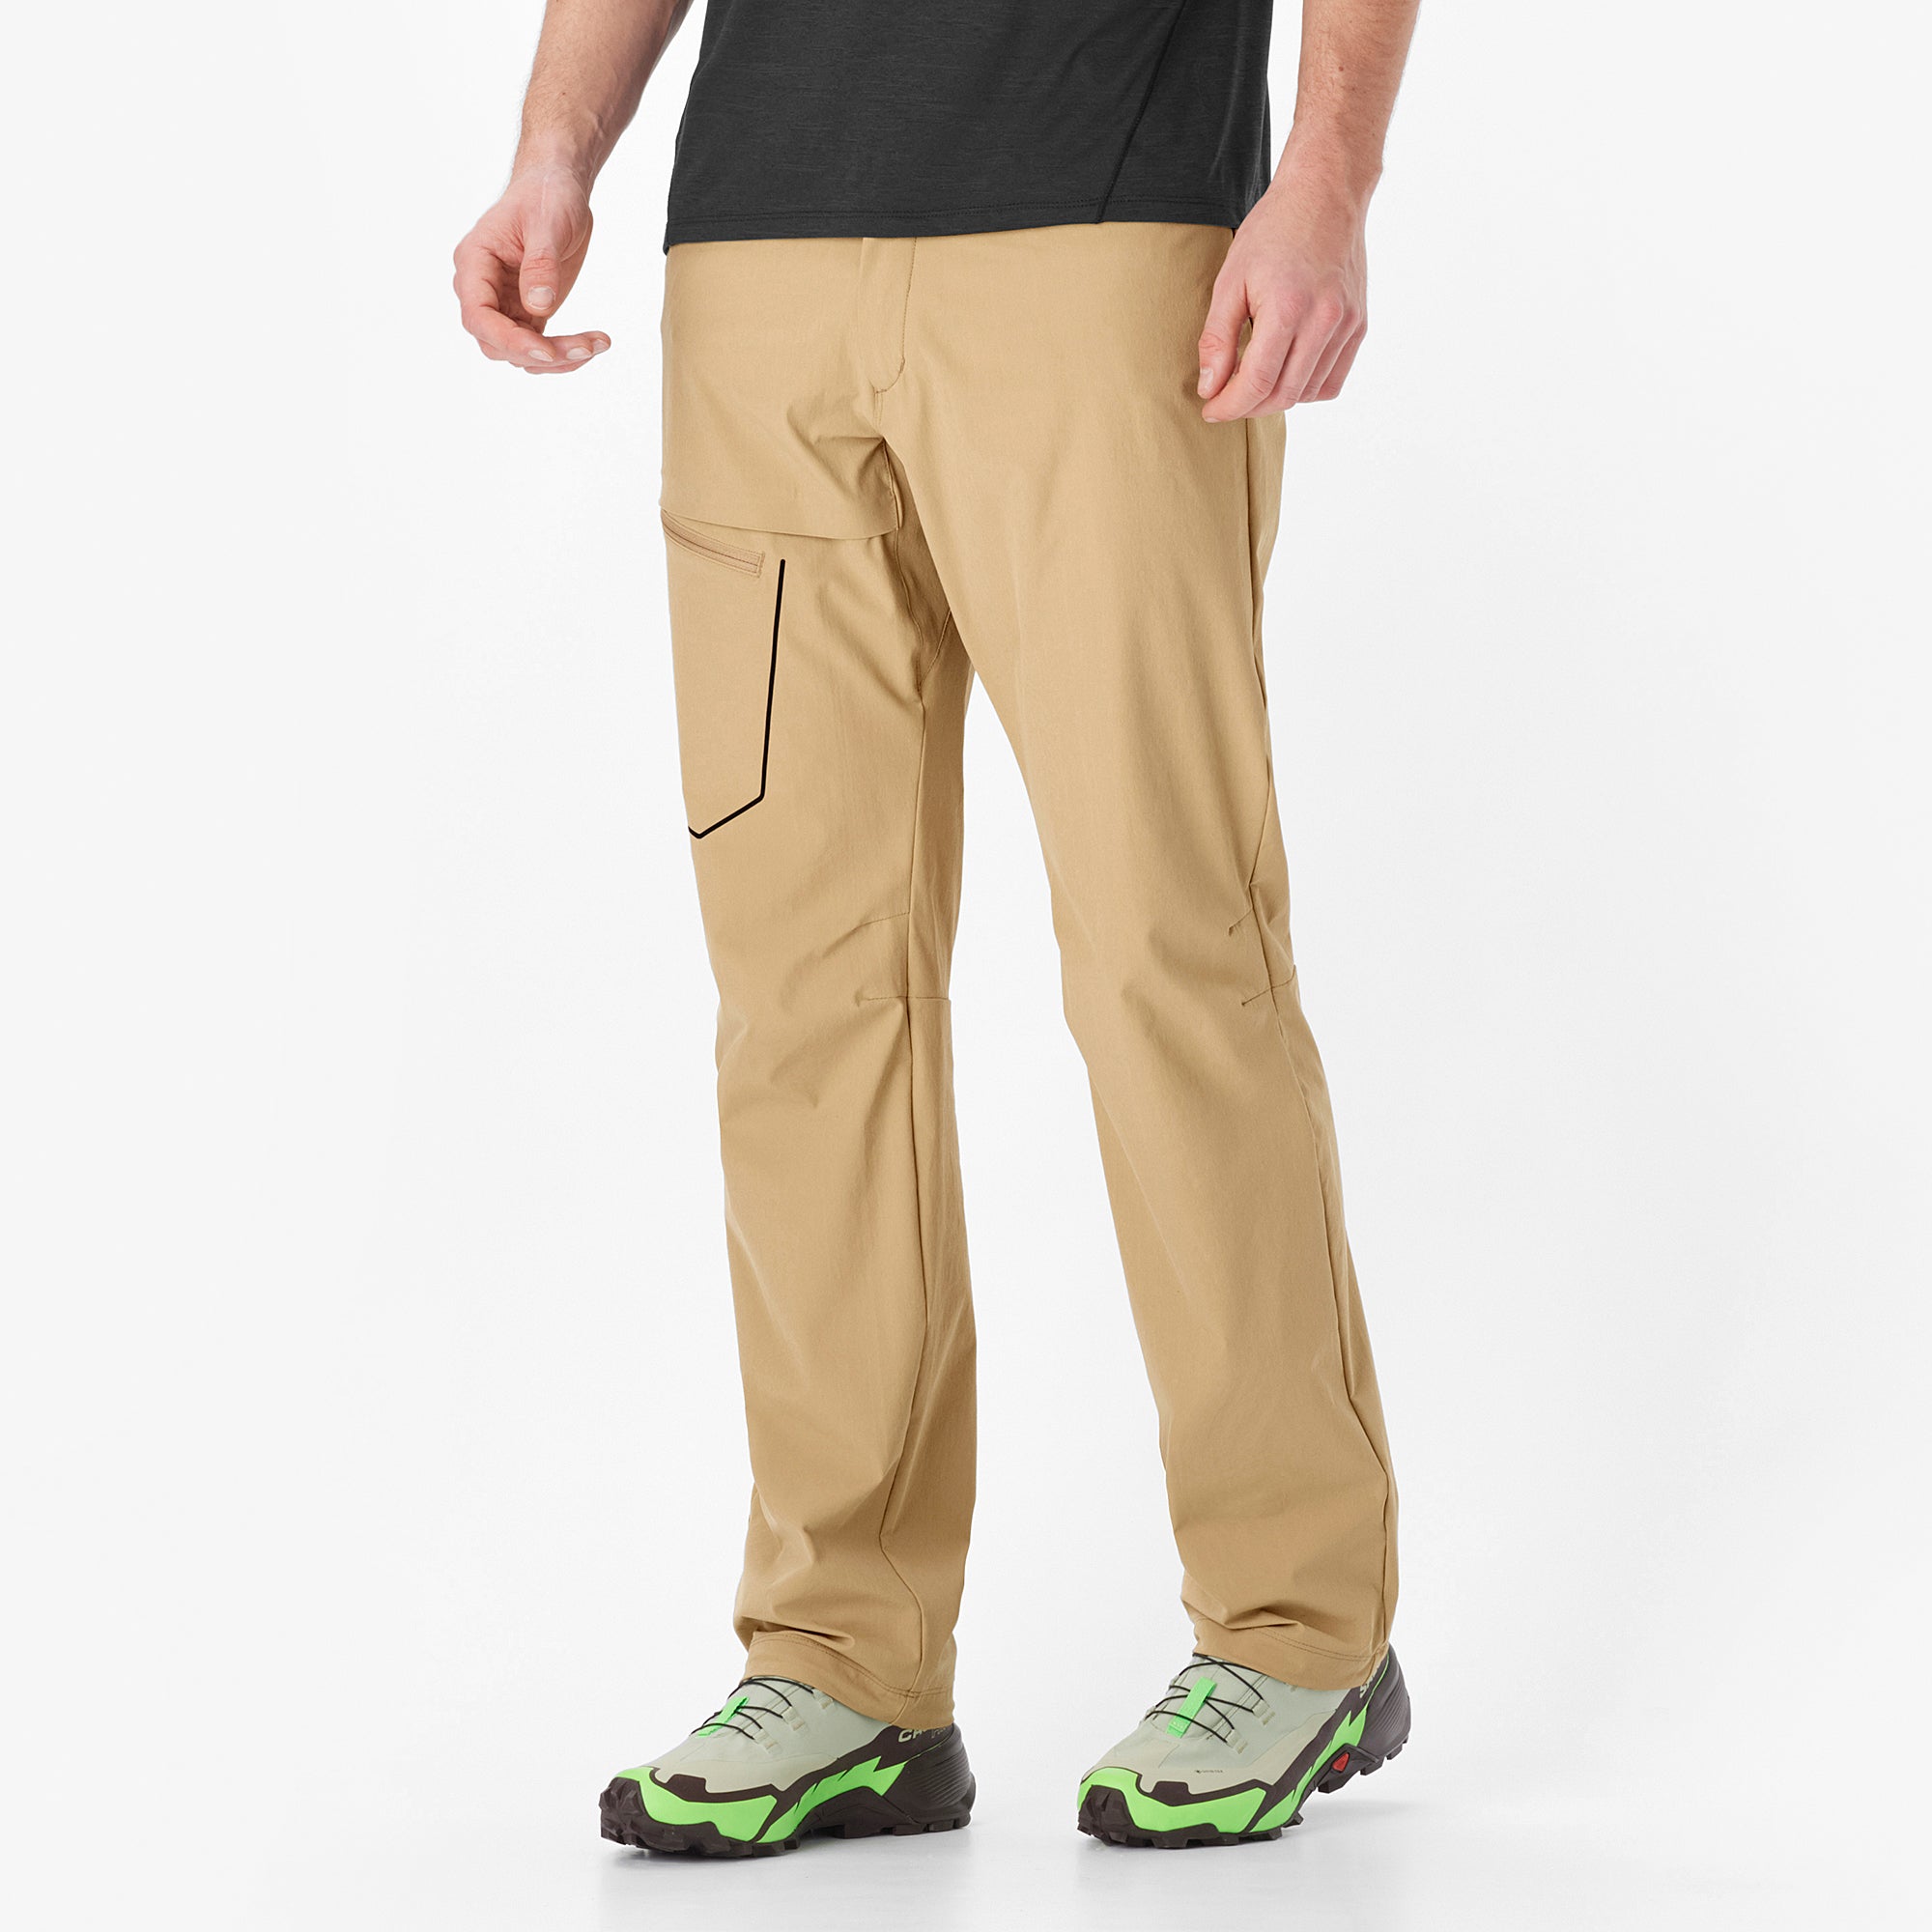 Men's Outdoor Sports trousers